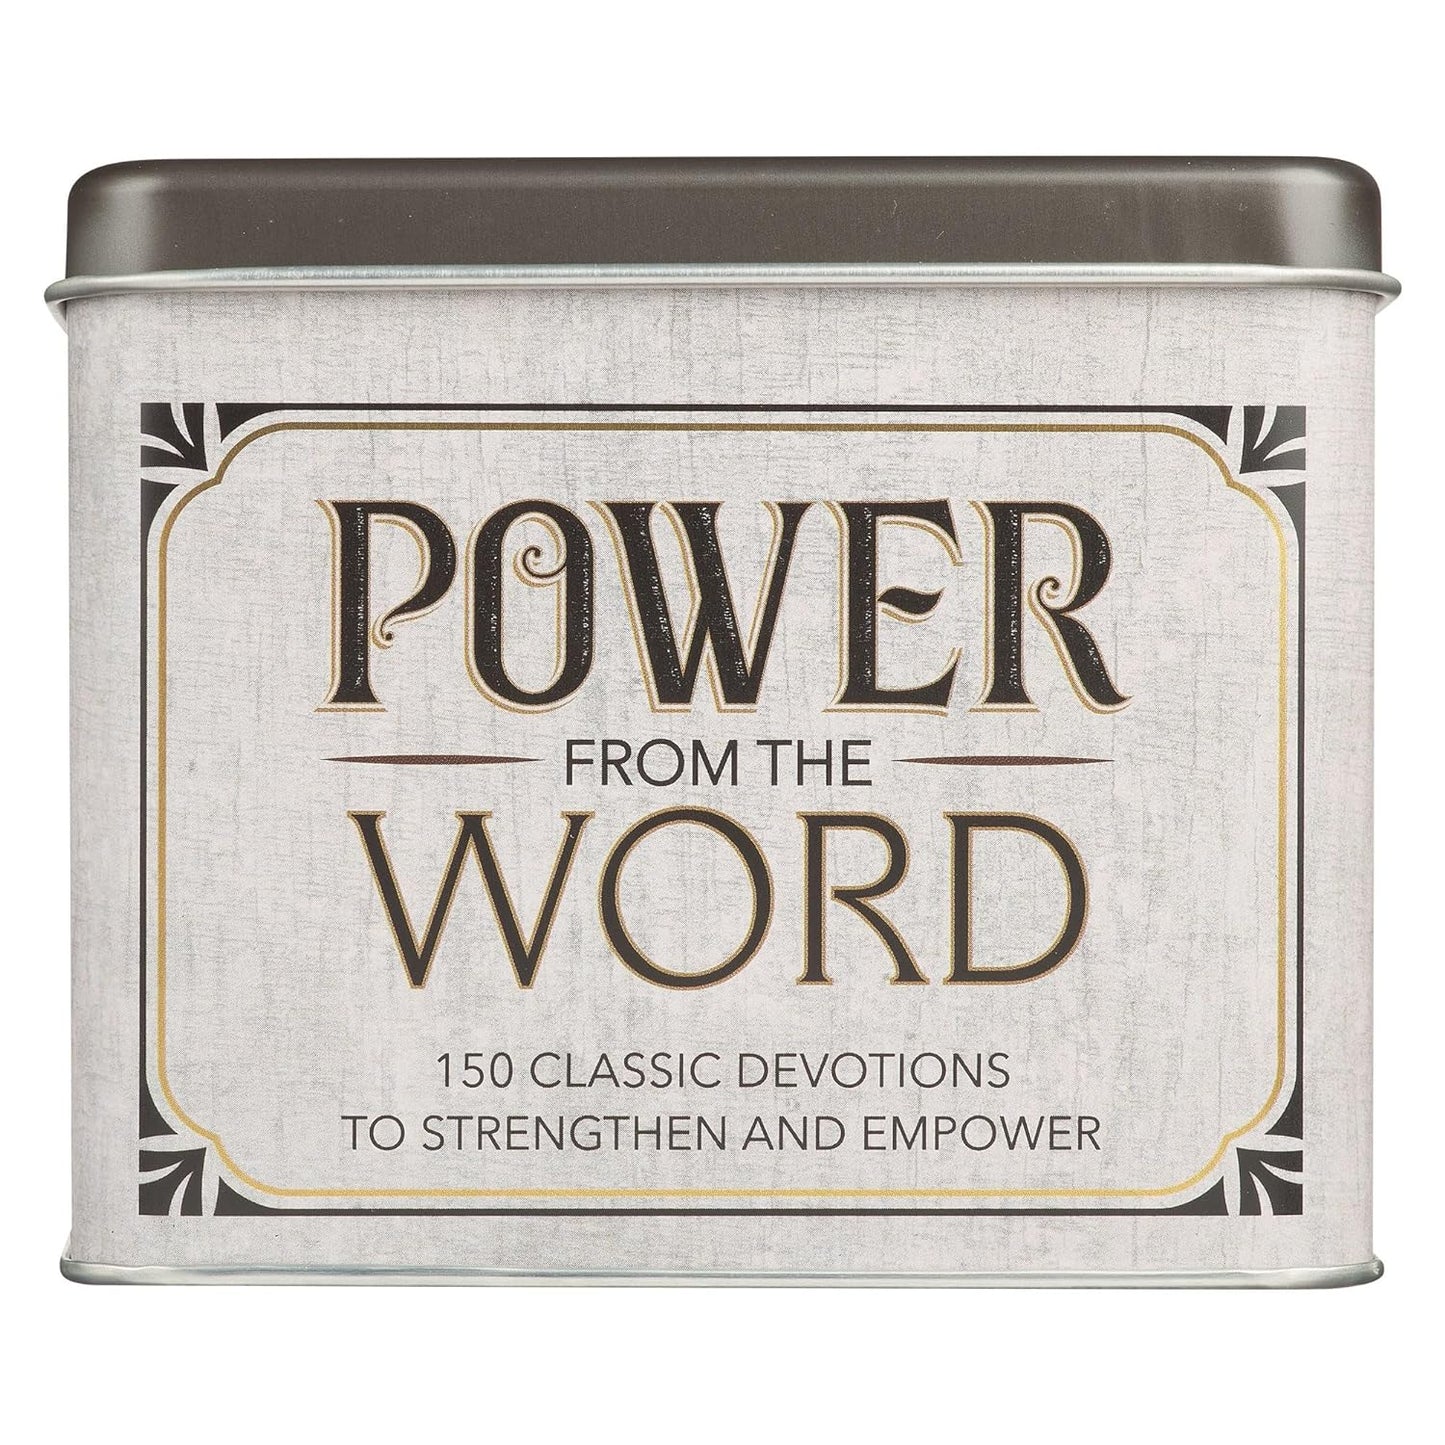 Power from the Word Cards in a Tin